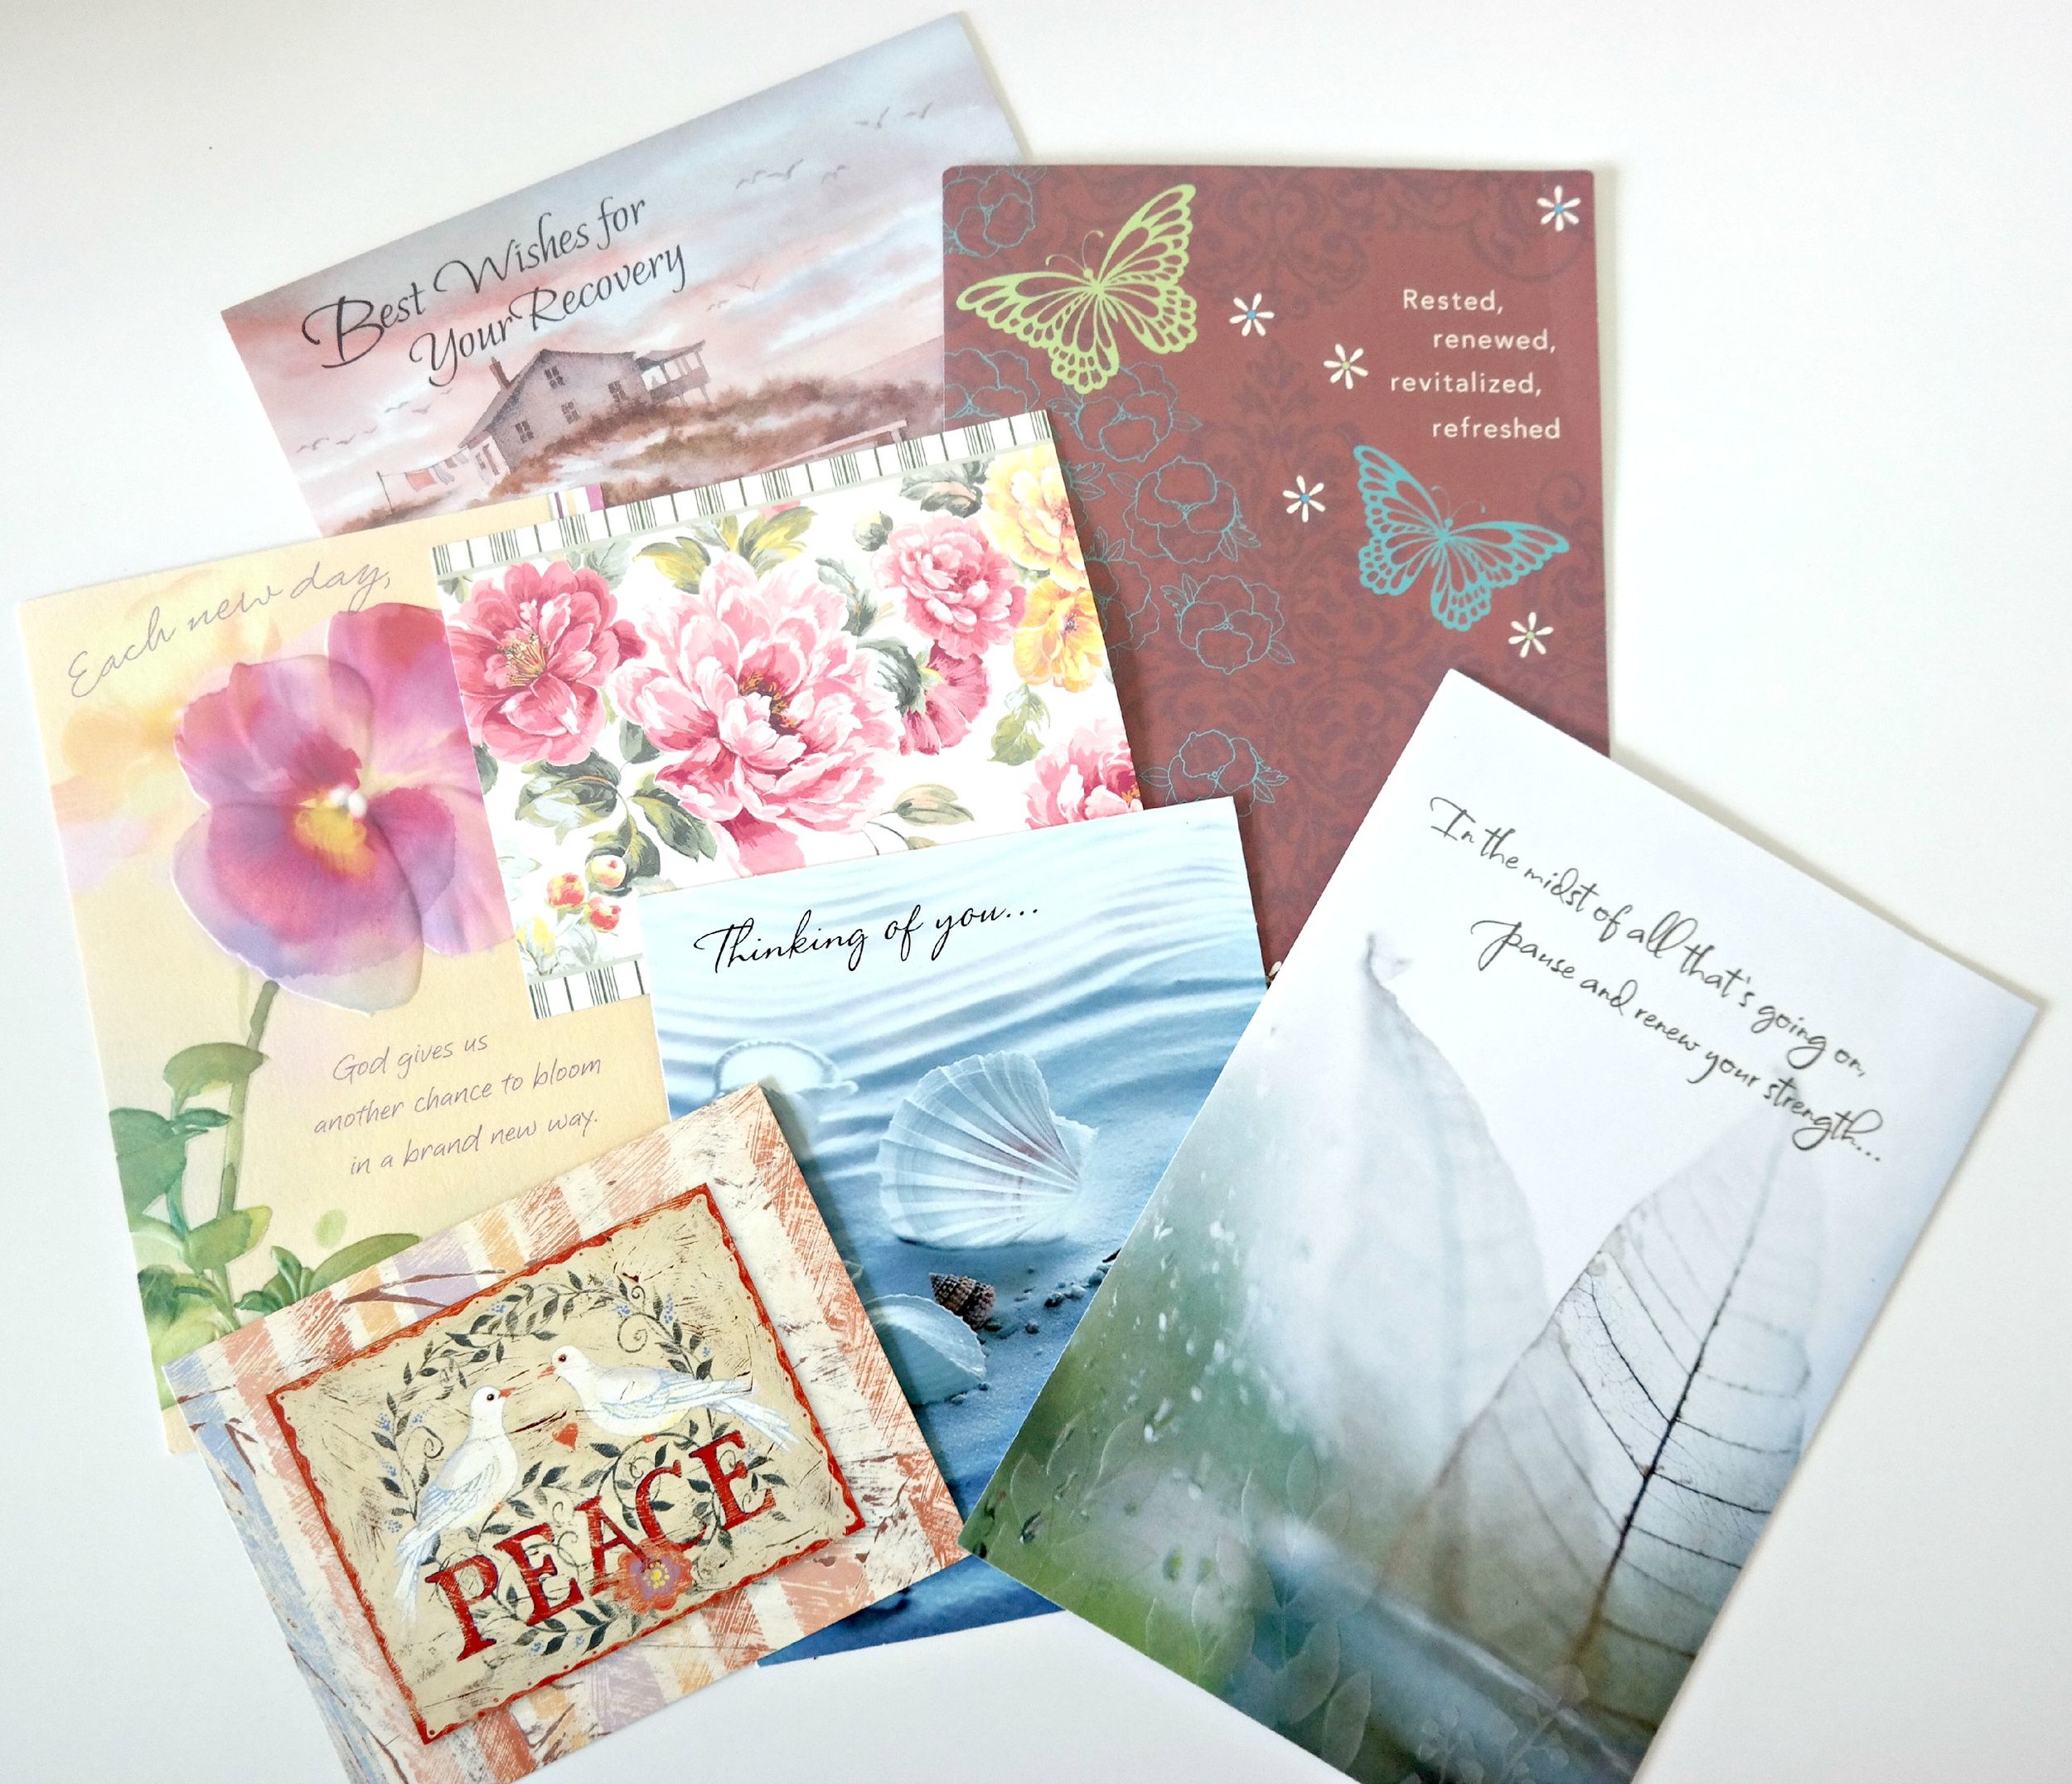 Cards that remind us someone is thinking of us in our time of need are the best!